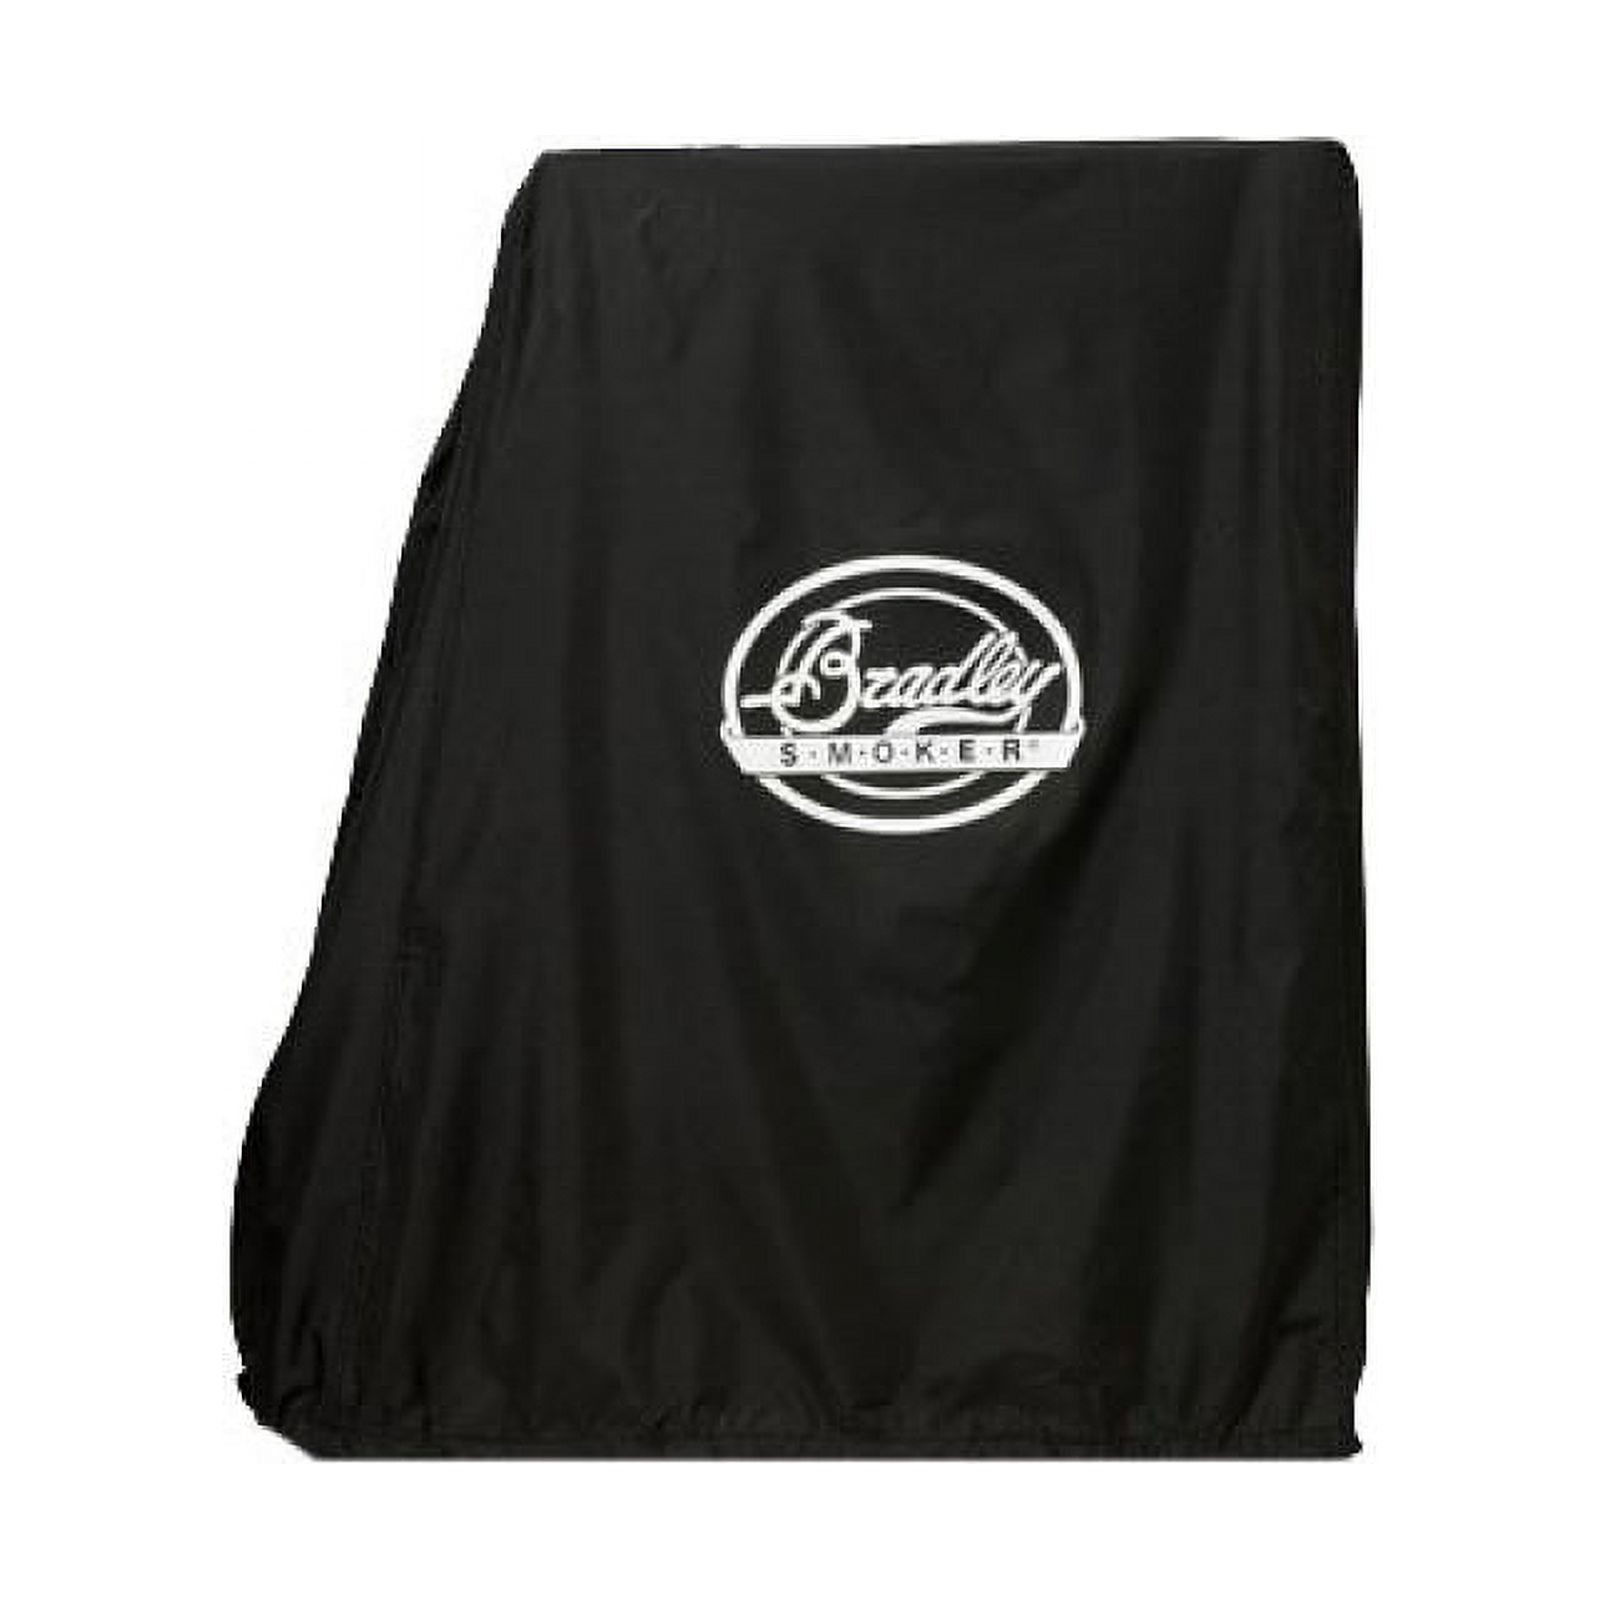 Bradley Technologies Smoker Weather Resistant Cover 2 Rack - image 1 of 1